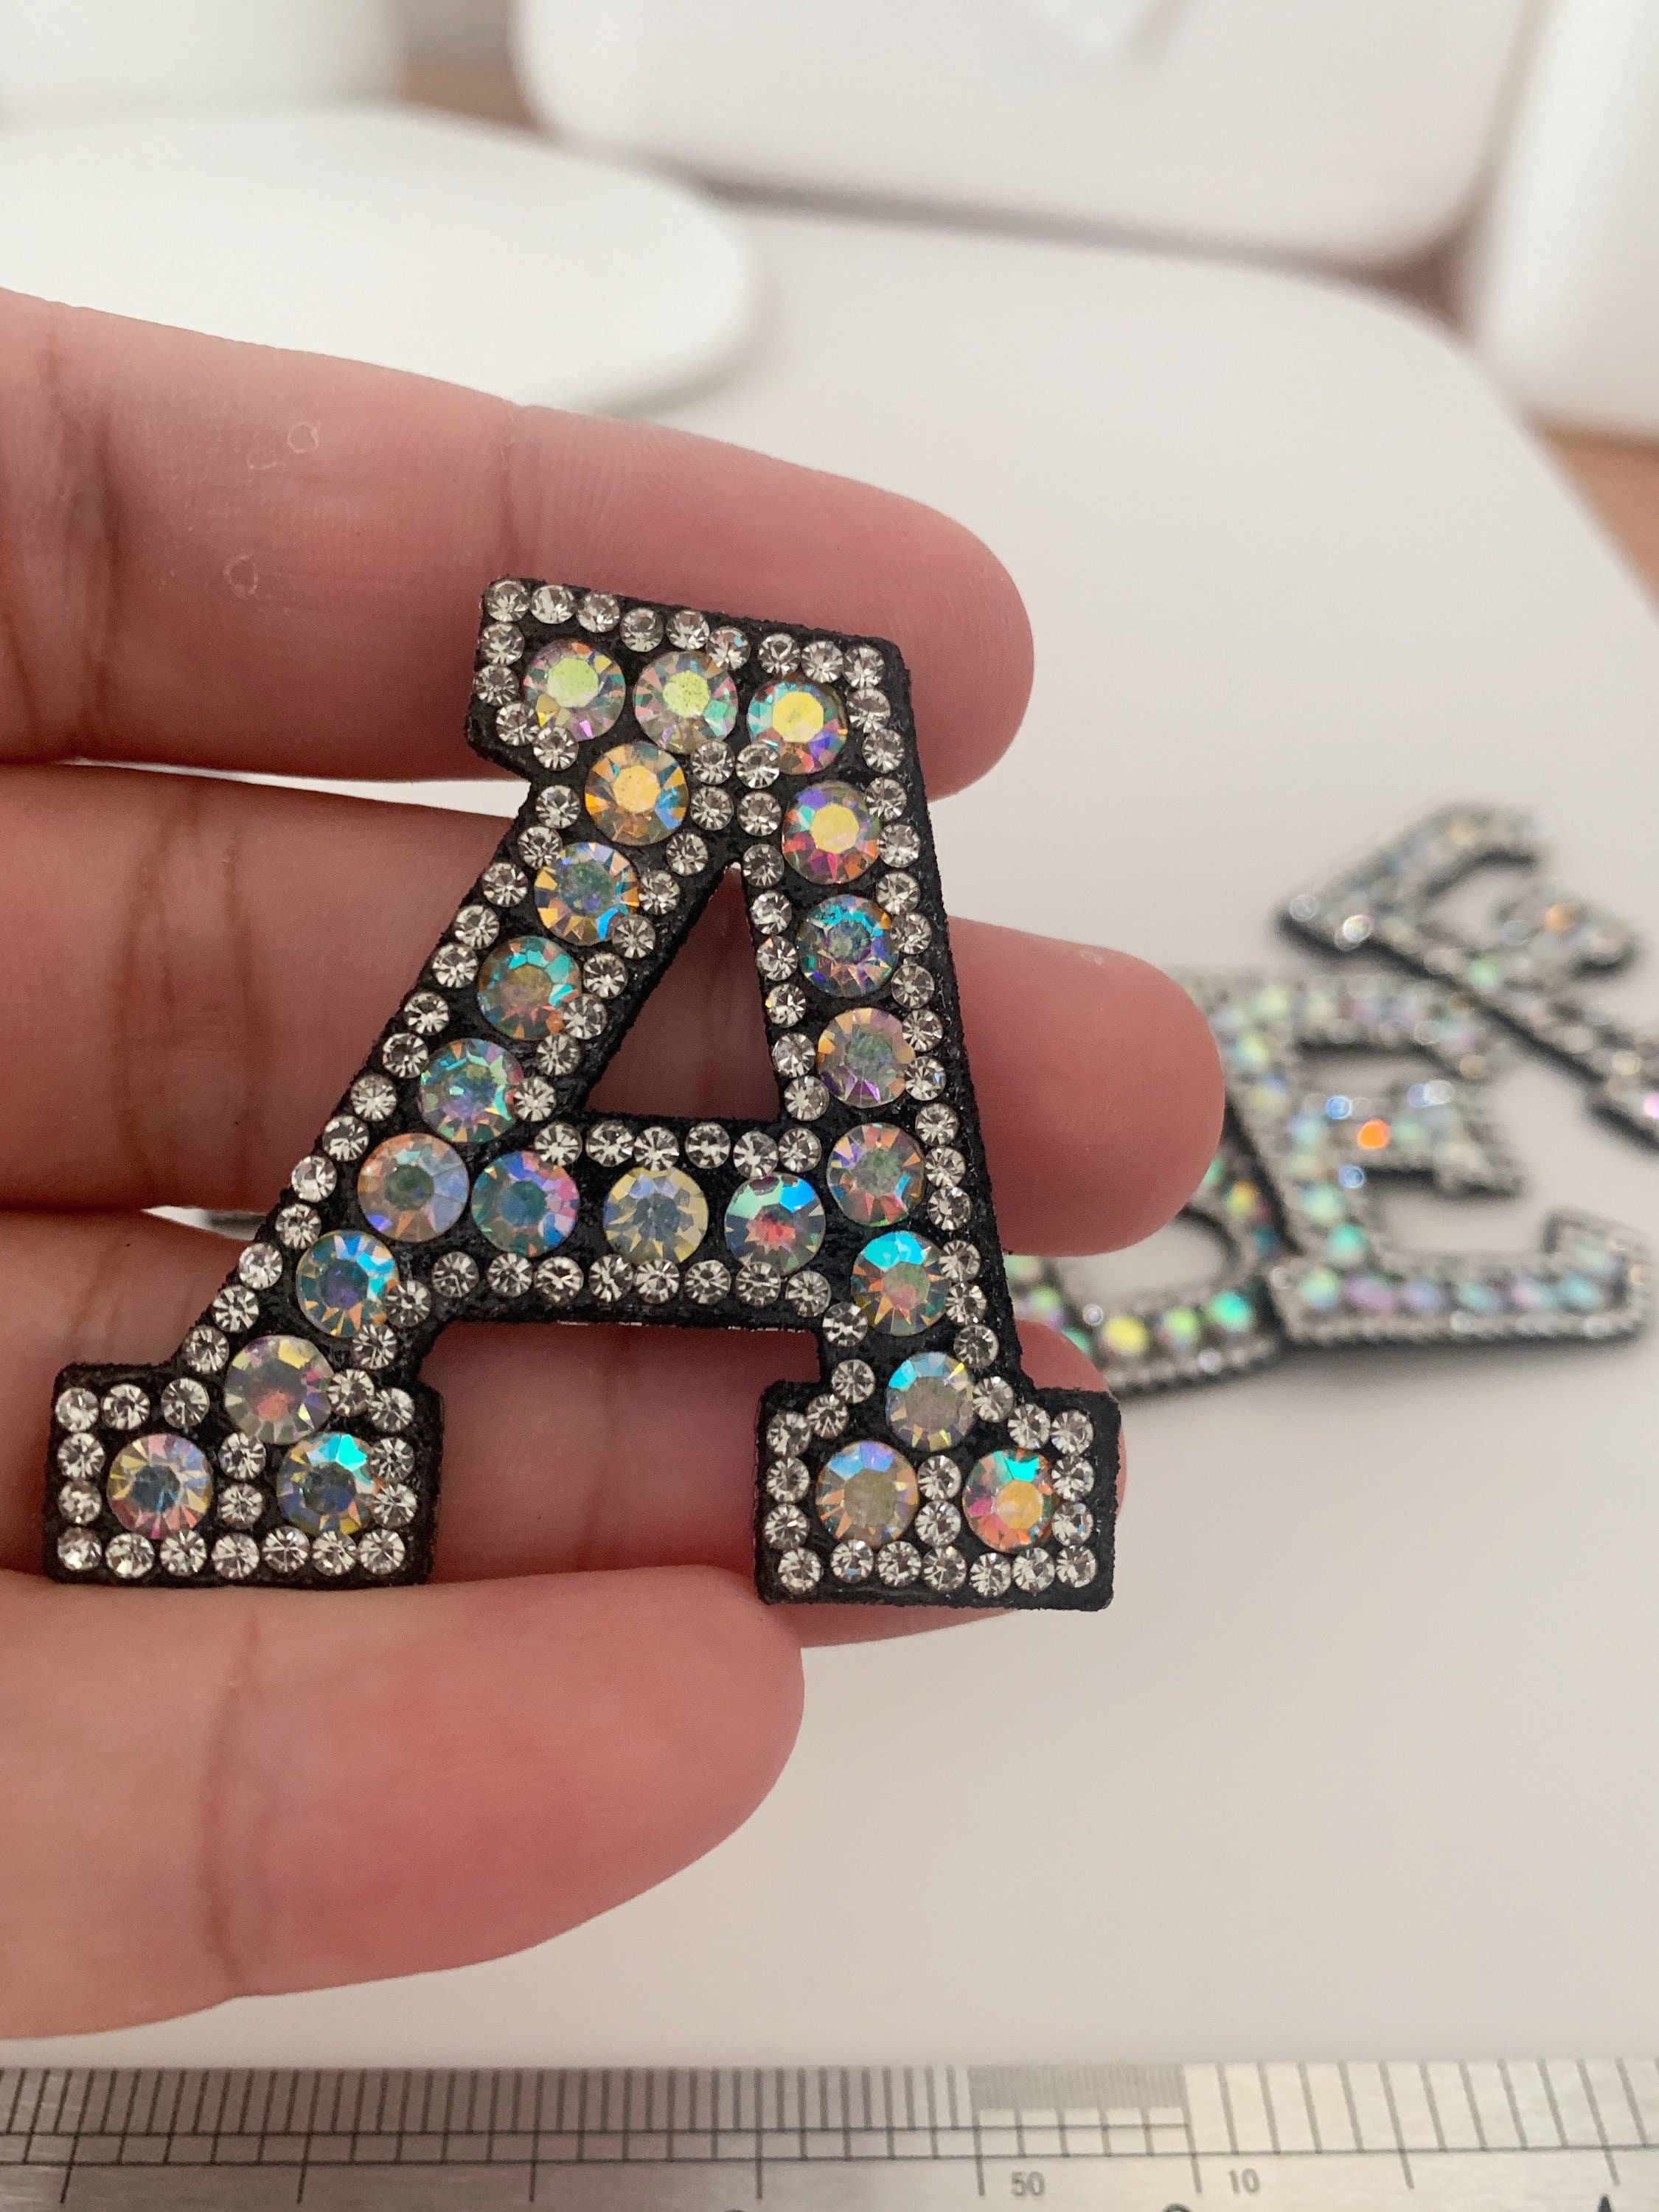 Beebeecraft NBEADS 20 Pcs 5 Colors Rhinestone Star Stickers, 2 Sizes  Crystal Glitter Rhinestone Stickers Iron on Stickers Sew On Patches Bling  Star